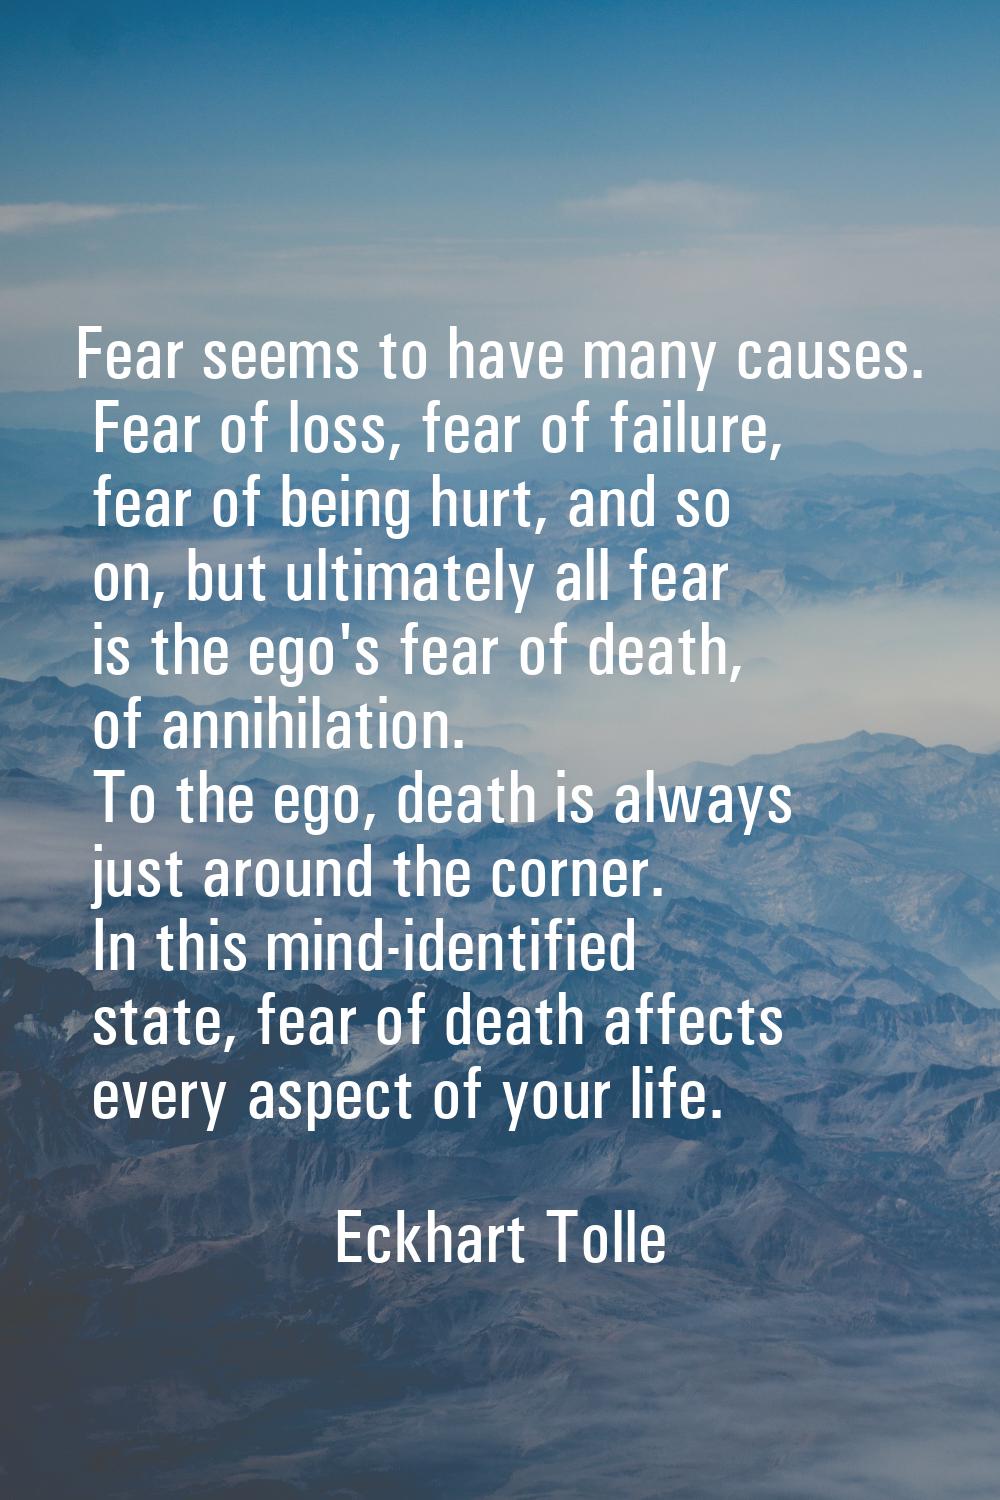 Fear seems to have many causes. Fear of loss, fear of failure, fear of being hurt, and so on, but u